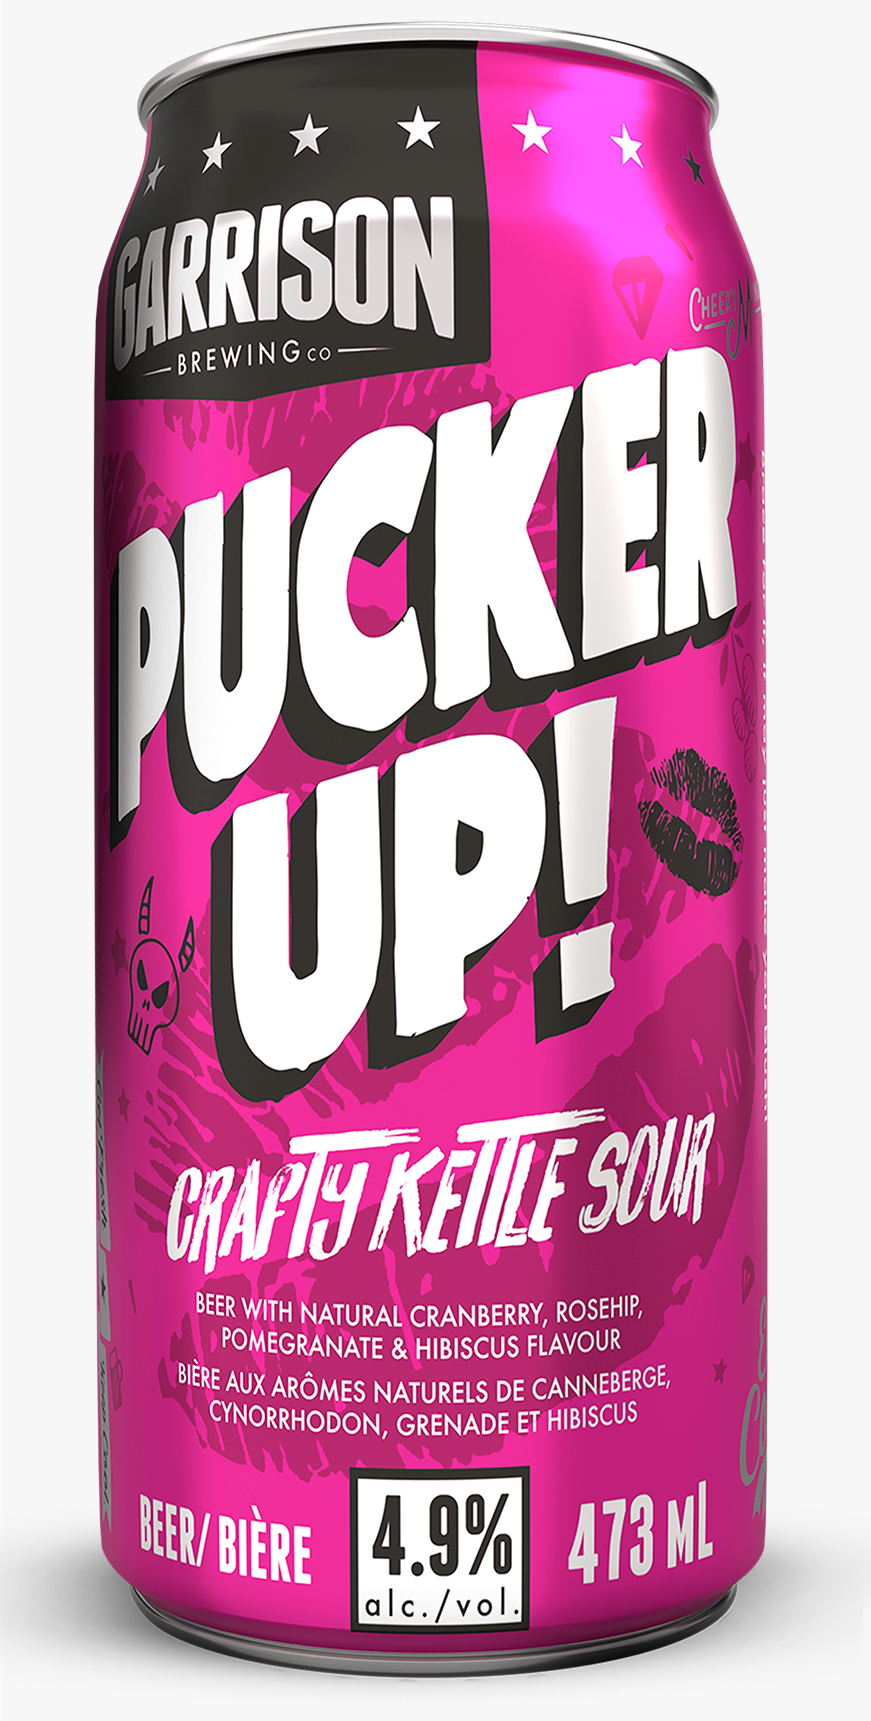 Pucker Up! Sour: Single 473ml can